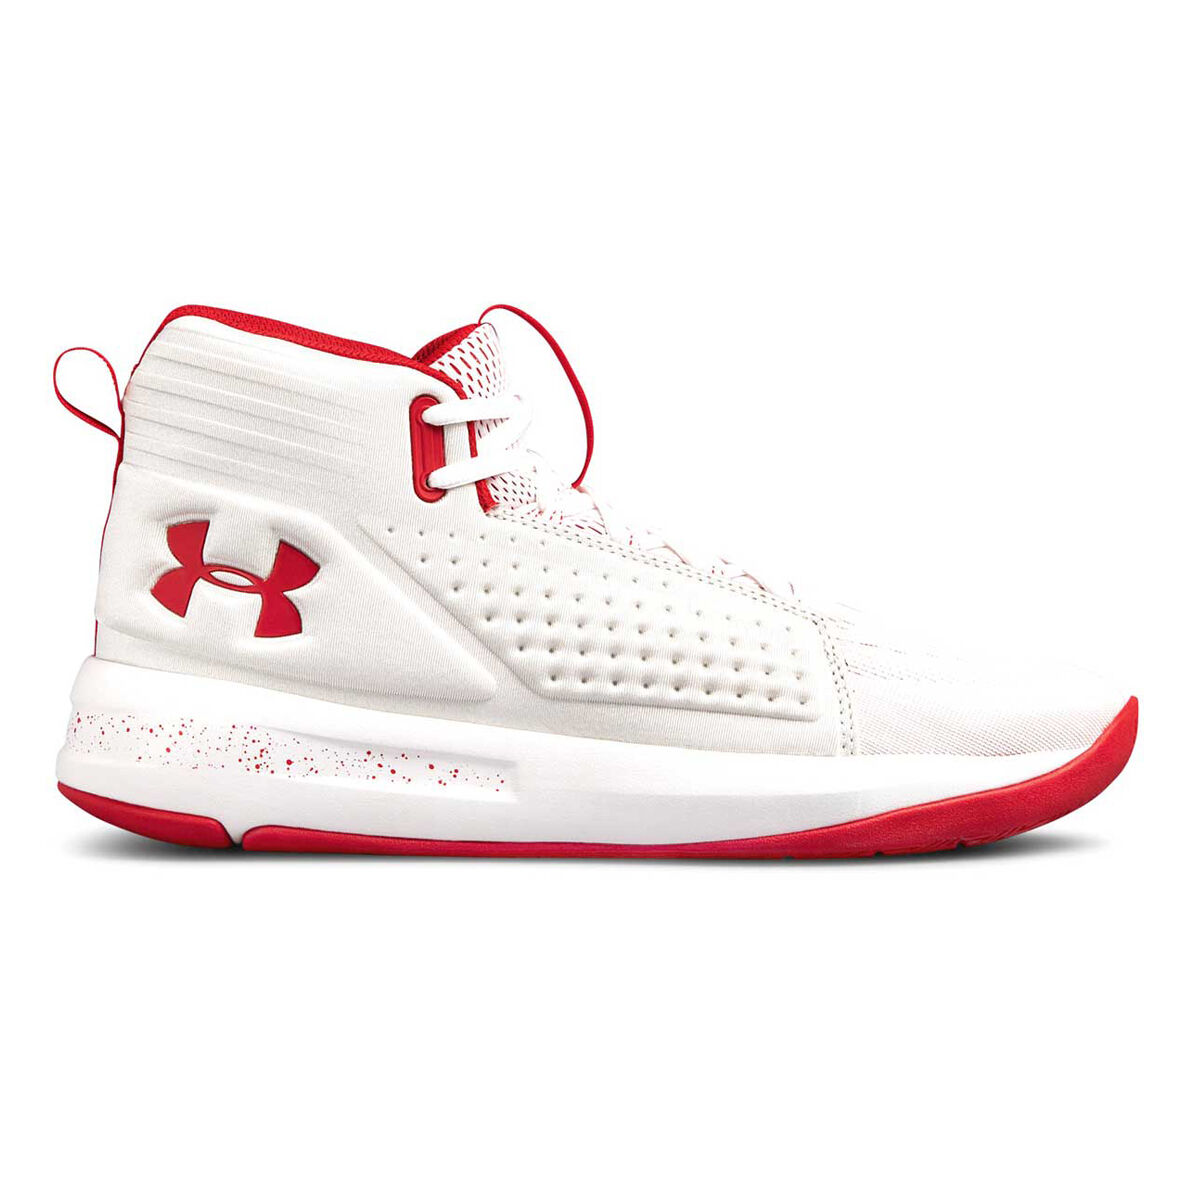 white under armour shoes